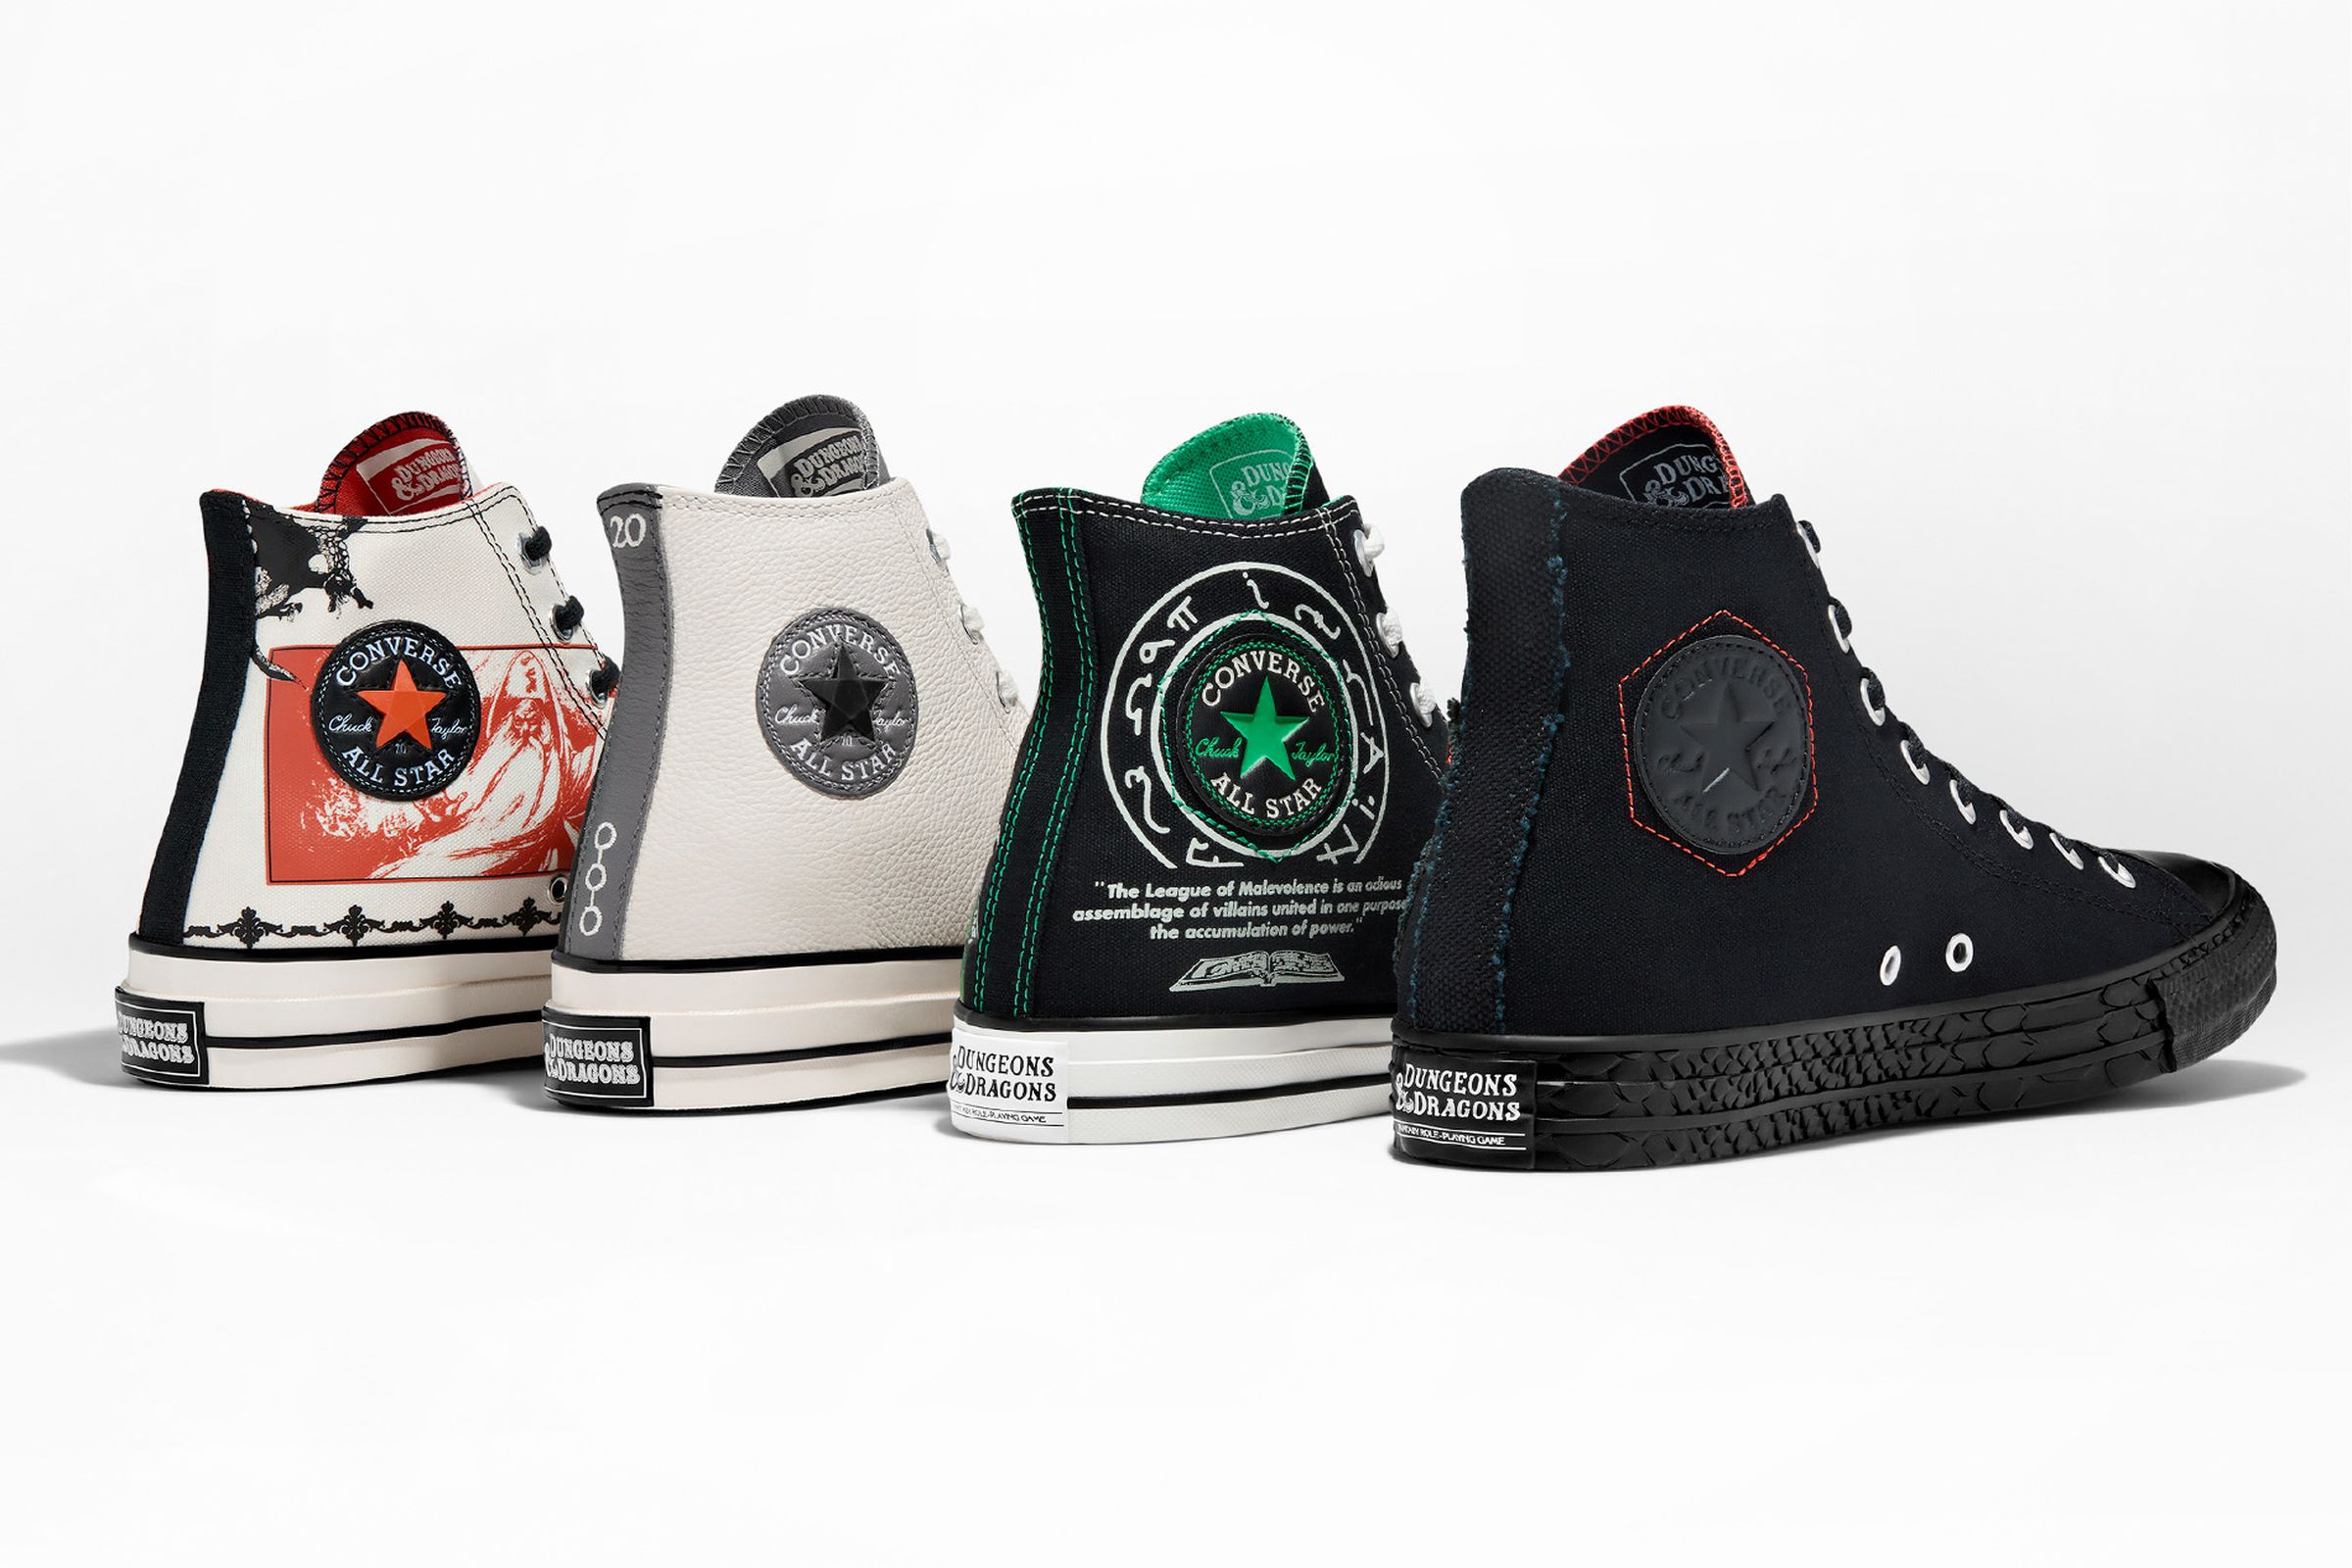 The lineup of D&amp;D-themed Converse sneakers.